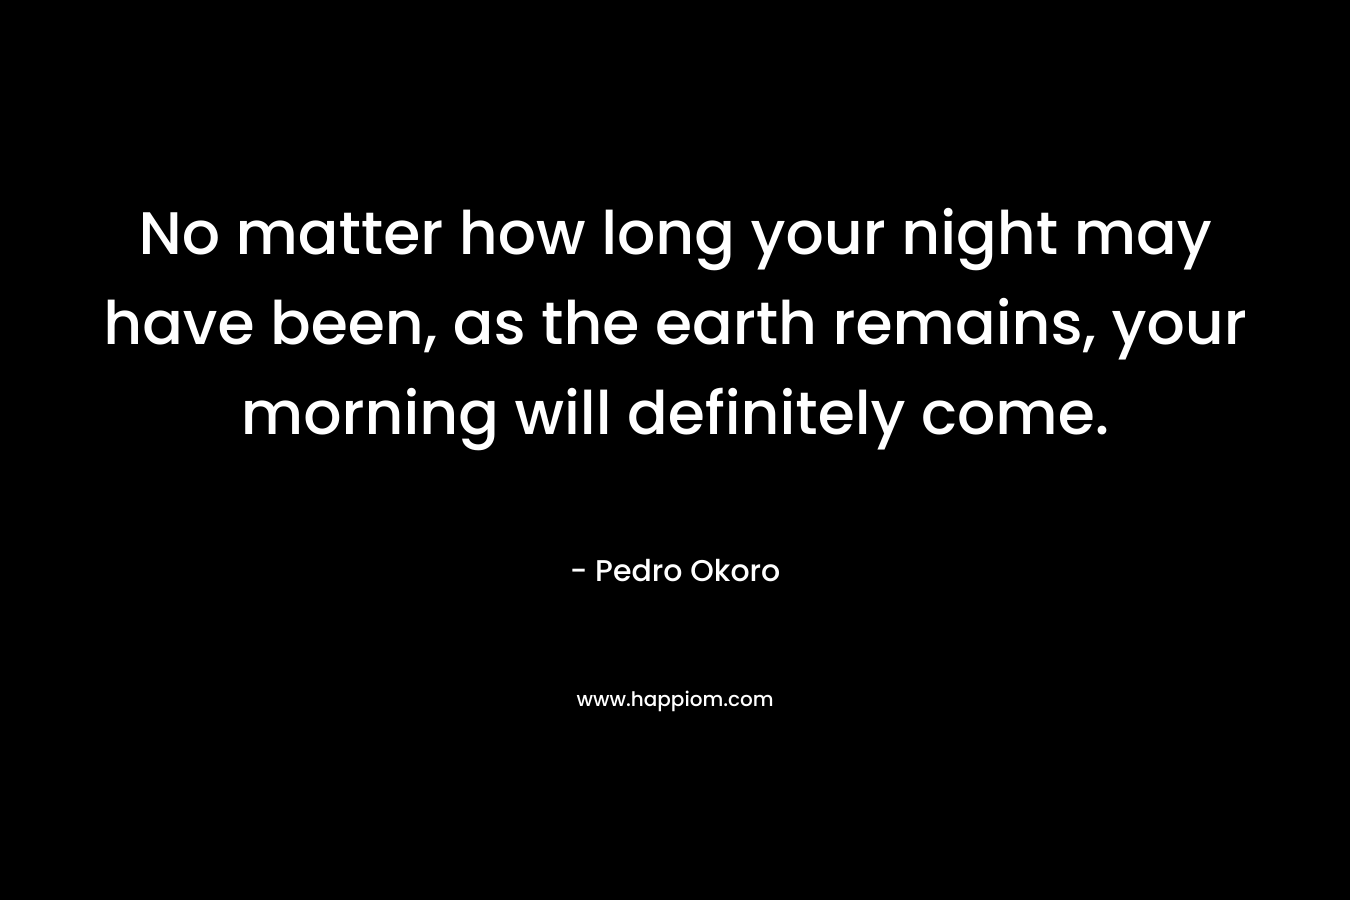 No matter how long your night may have been, as the earth remains, your morning will definitely come.